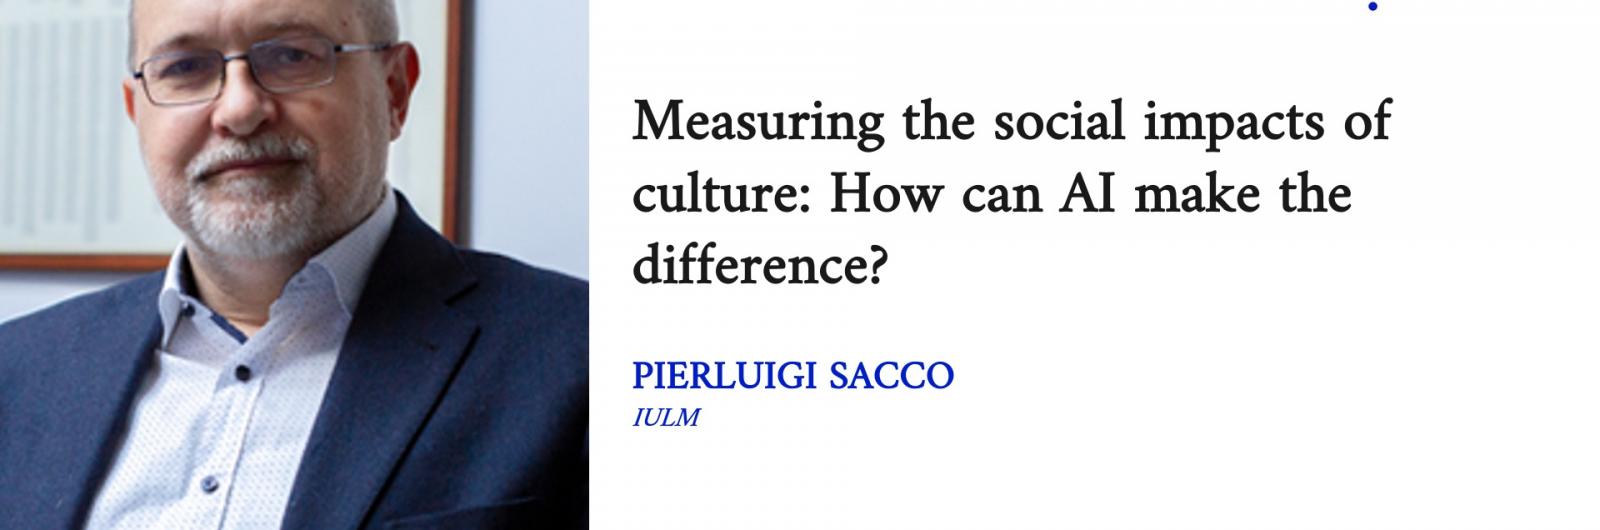 Measuring the social impacts of culture